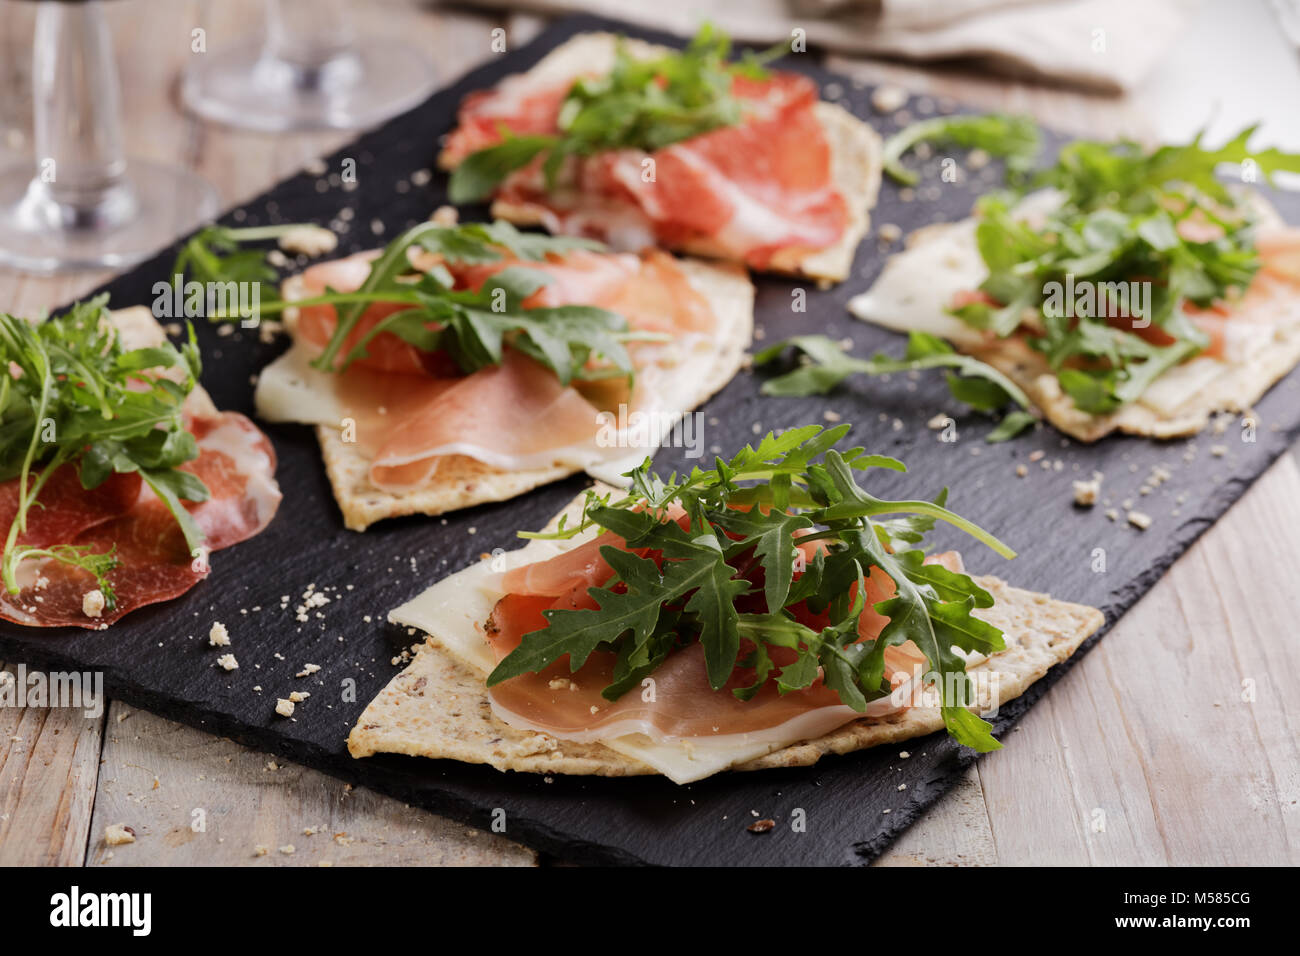 Sandwiches with Prosciutto, sliced cheese, and rocket salad on wedges of piadina Stock Photo